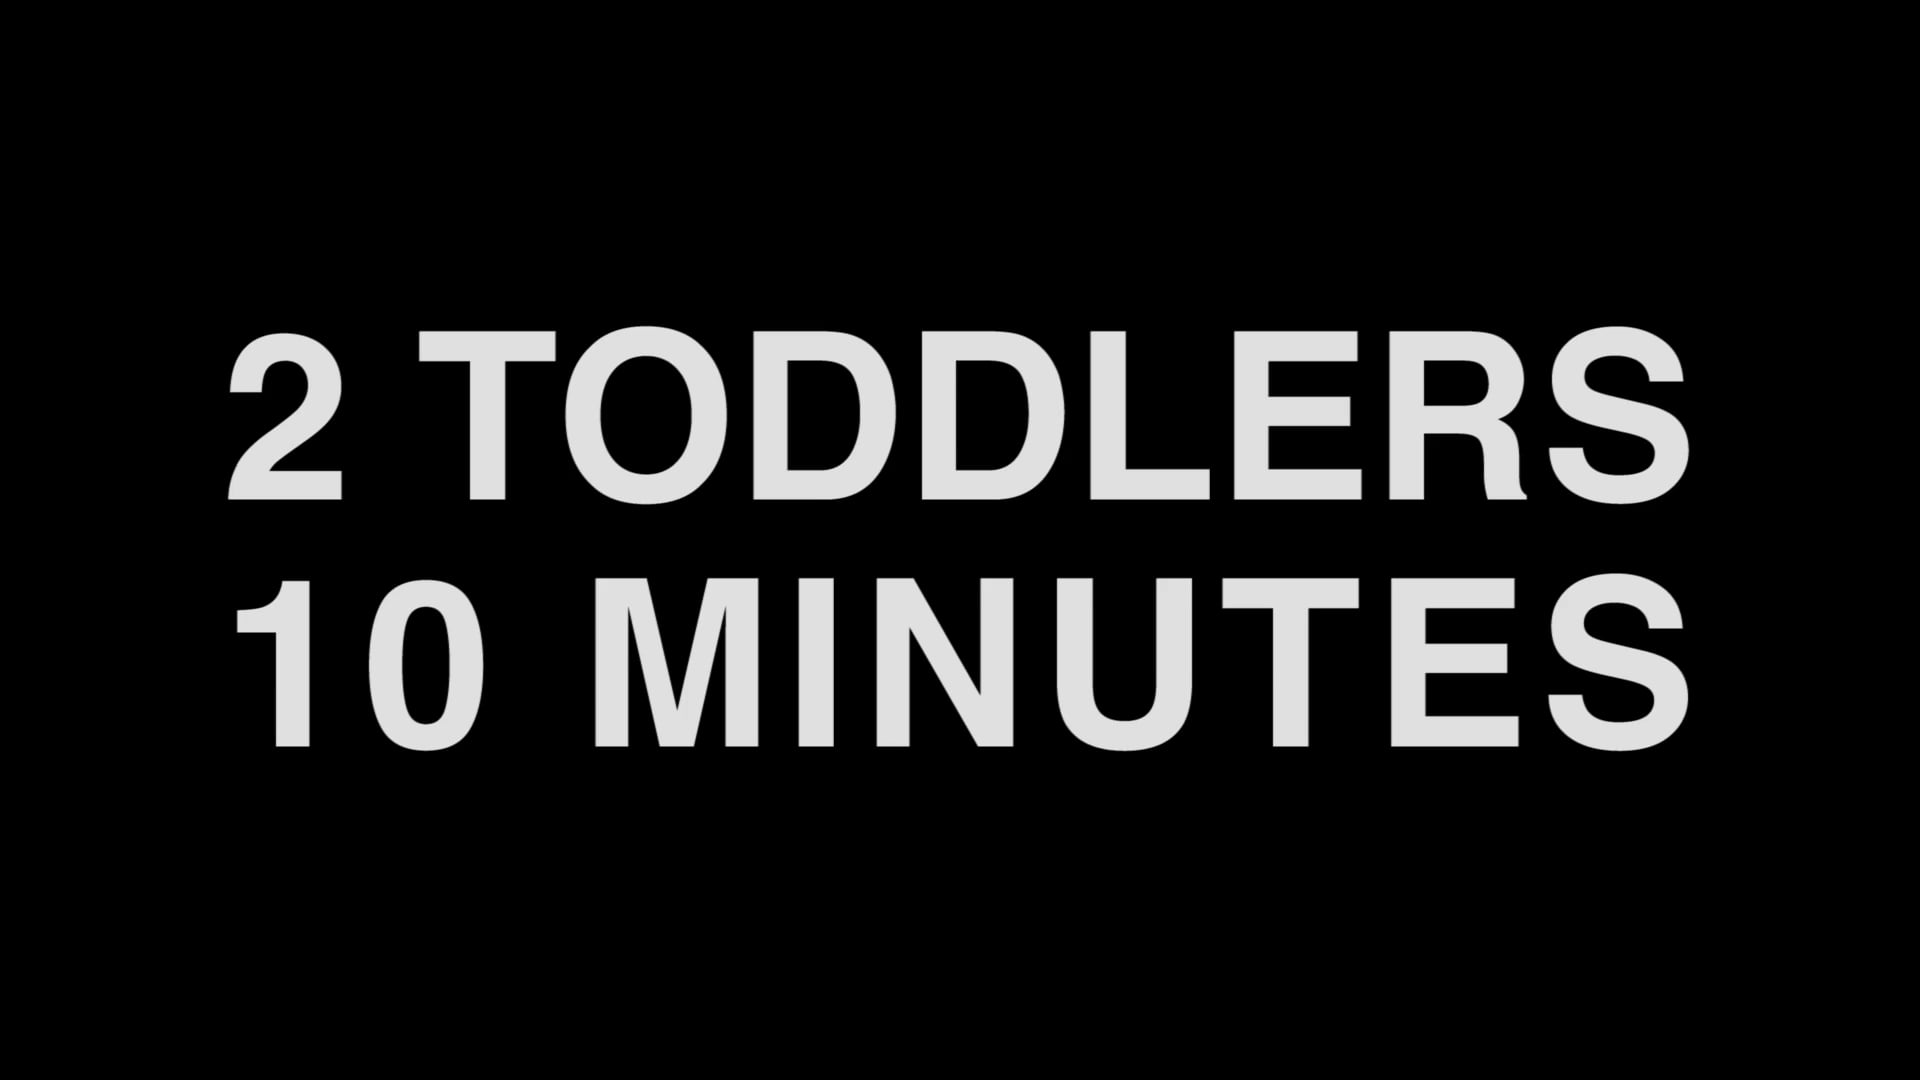 2 Toddlers 10 Minutes